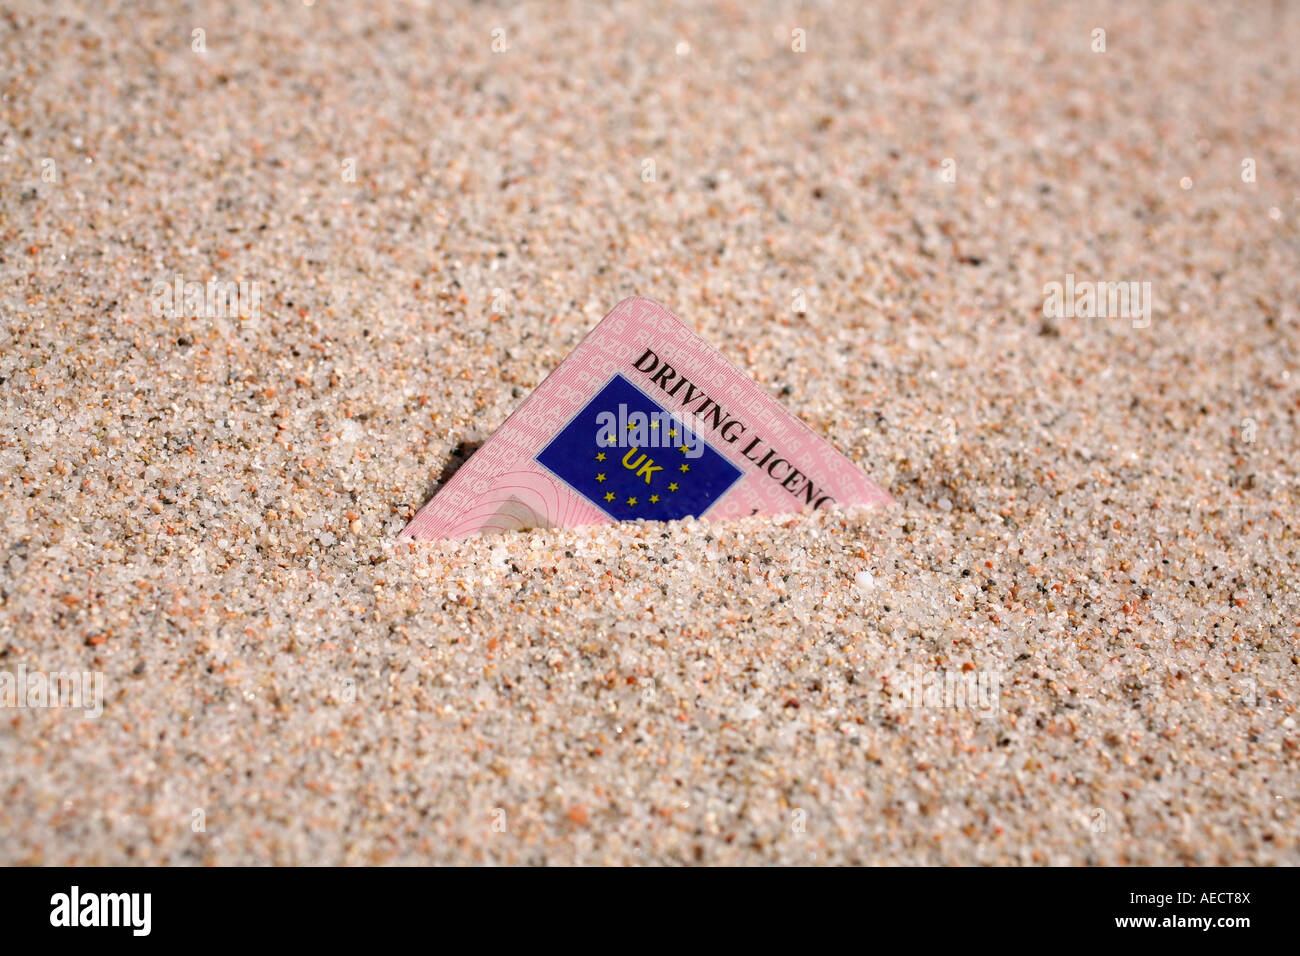 UK driving licence buried in sand Stock Photo